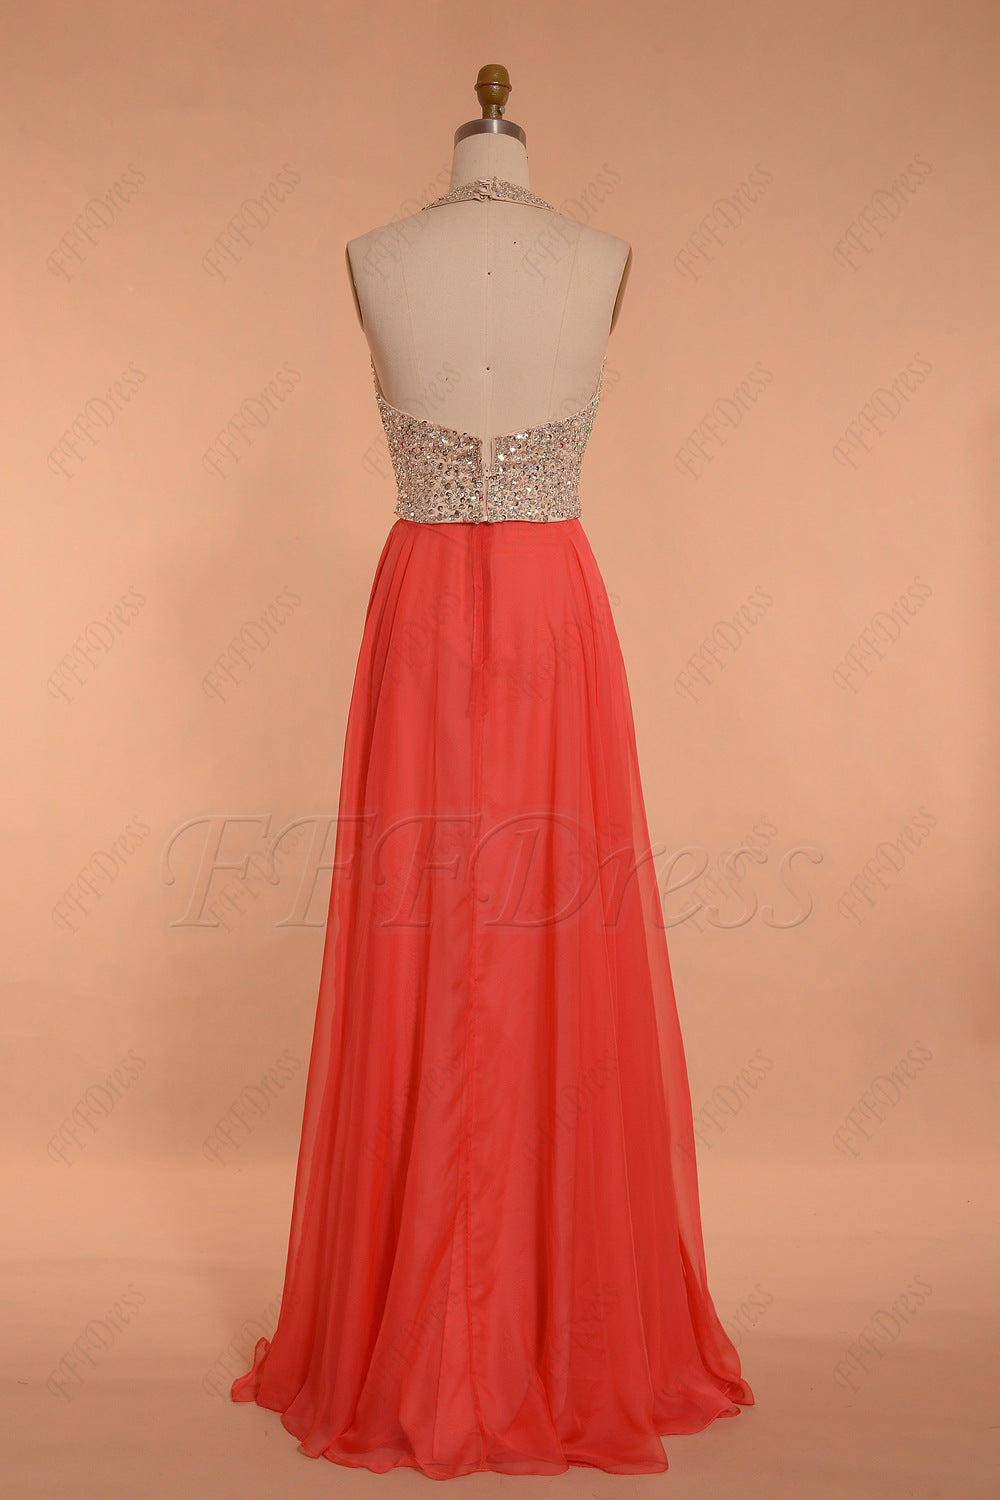 Halter Beaded Coral Prom Dresses long